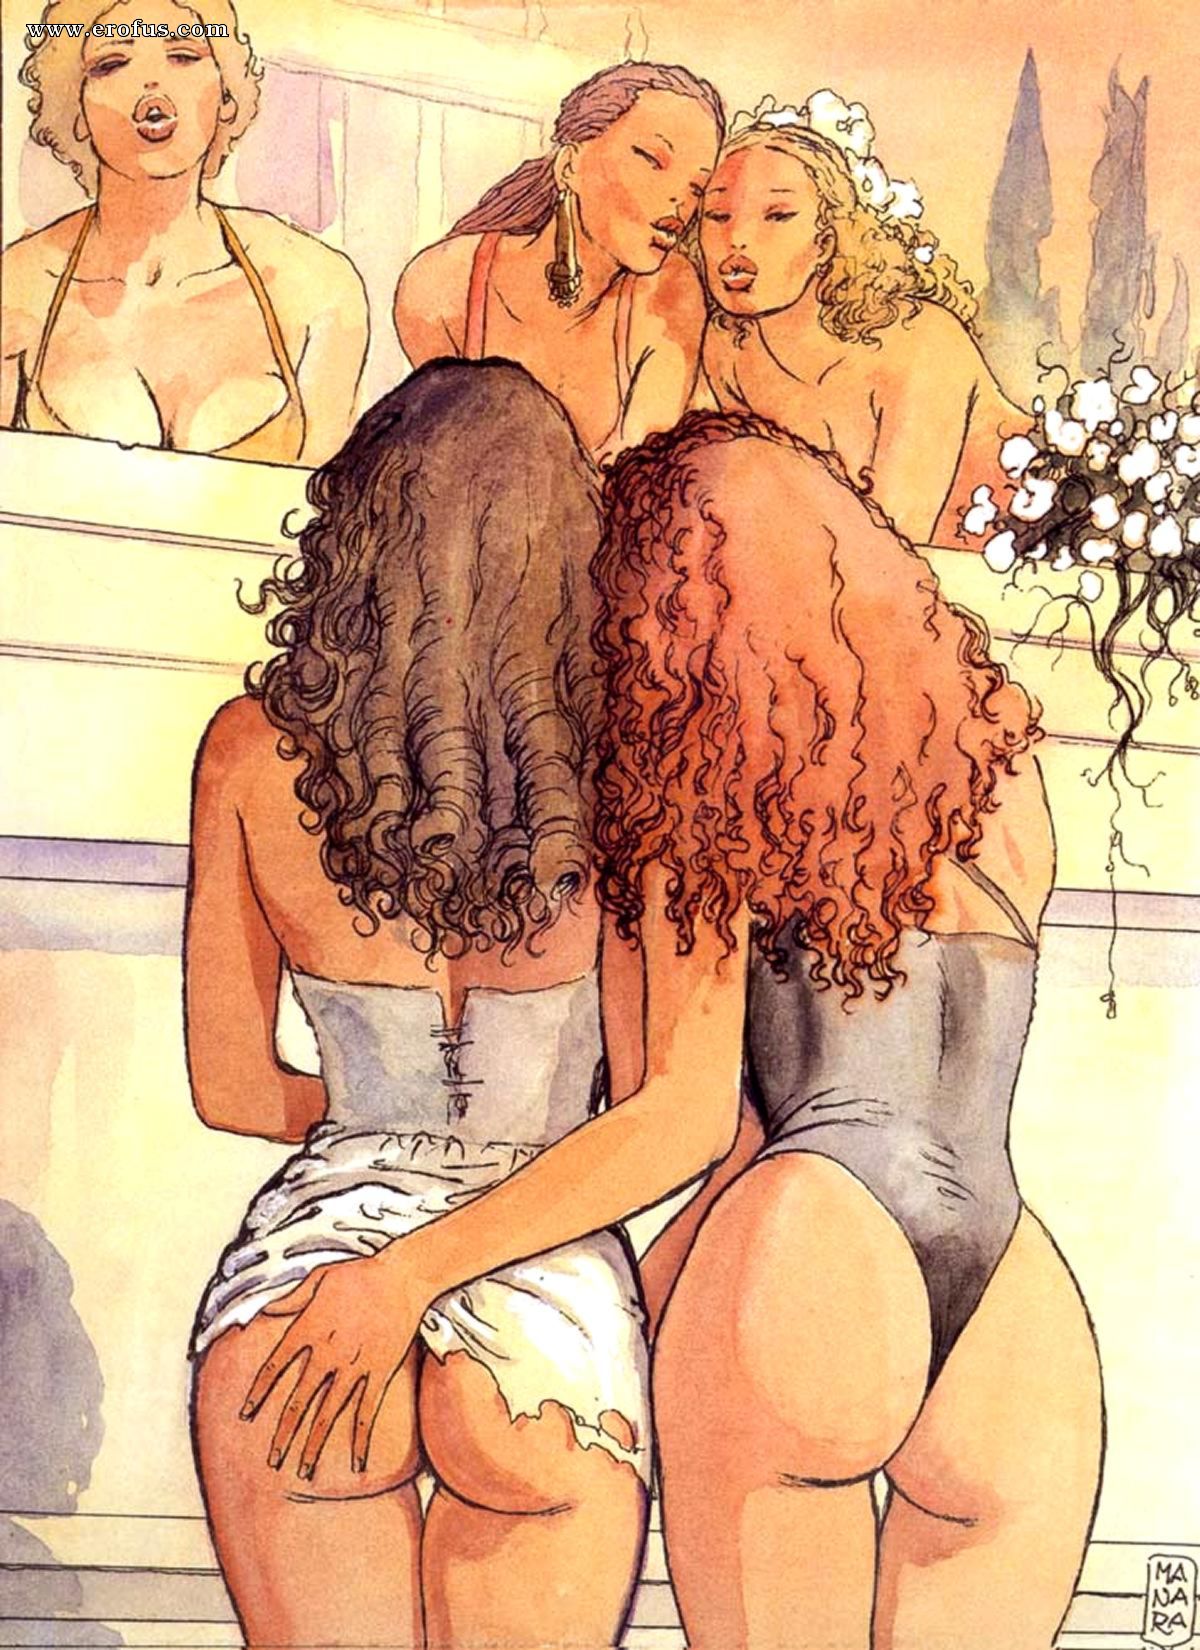 The Best Erotic Comics By Great Artists